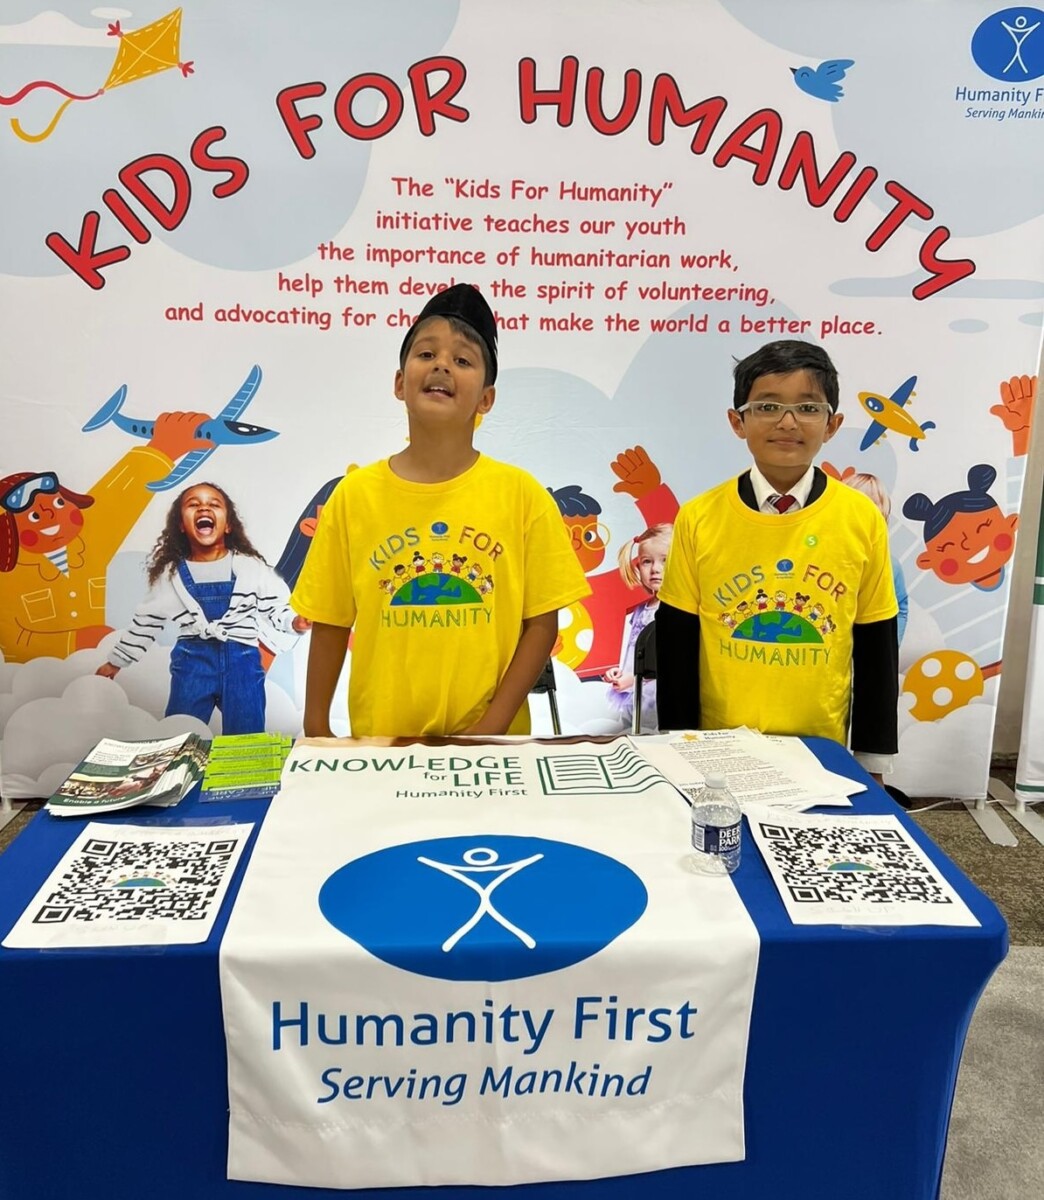 Two youth wearing yellow Kids for Humanity t-shirts stand behind a table covered with banners and fliers. Behind them is a large banner reading Kids for Humanity.